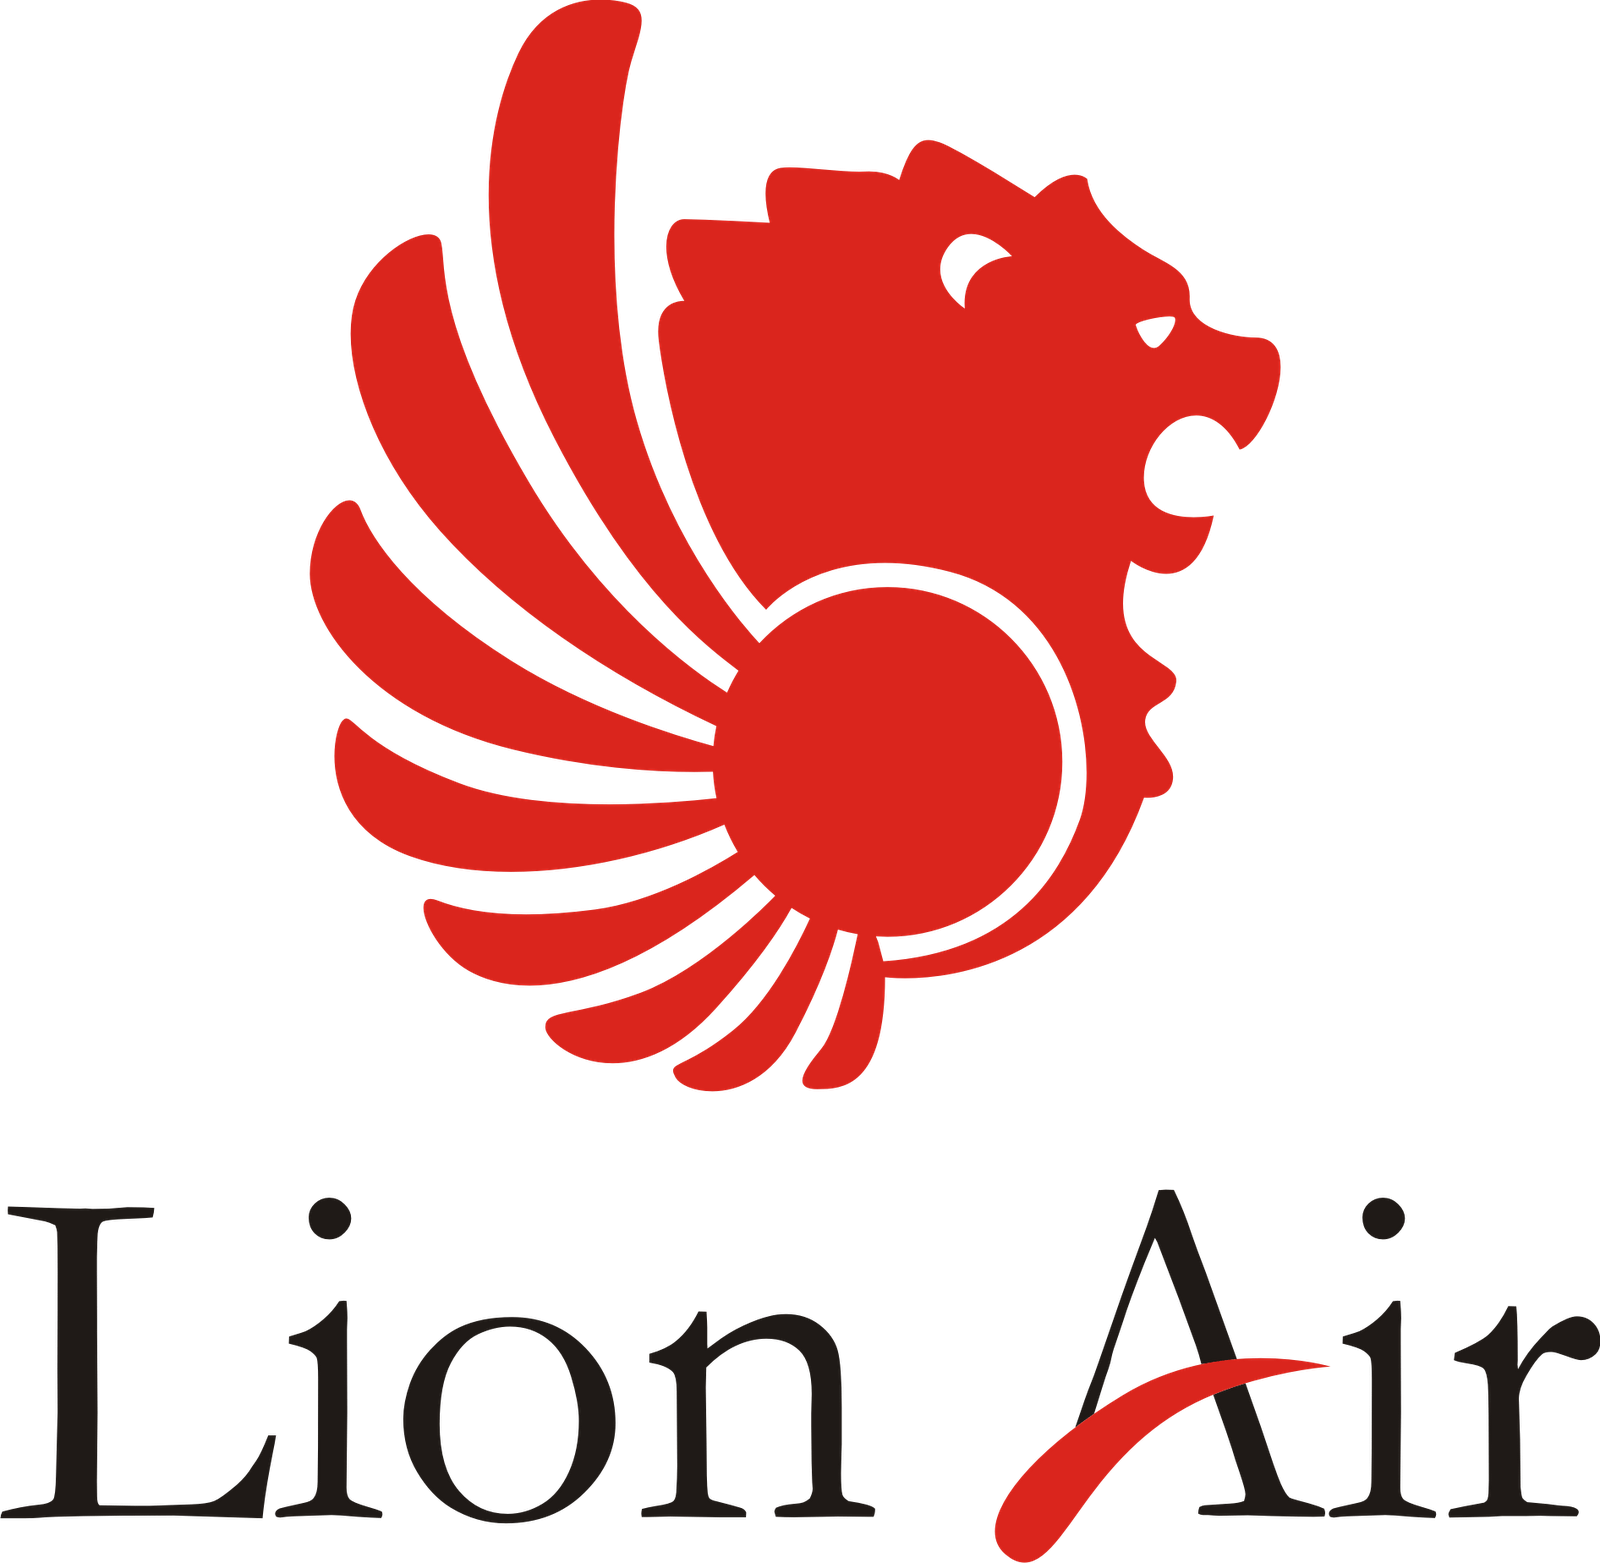 Asia Airlines Logo - Lion Air Logo | Airlines of Asia - Present and Past | Pinterest ...